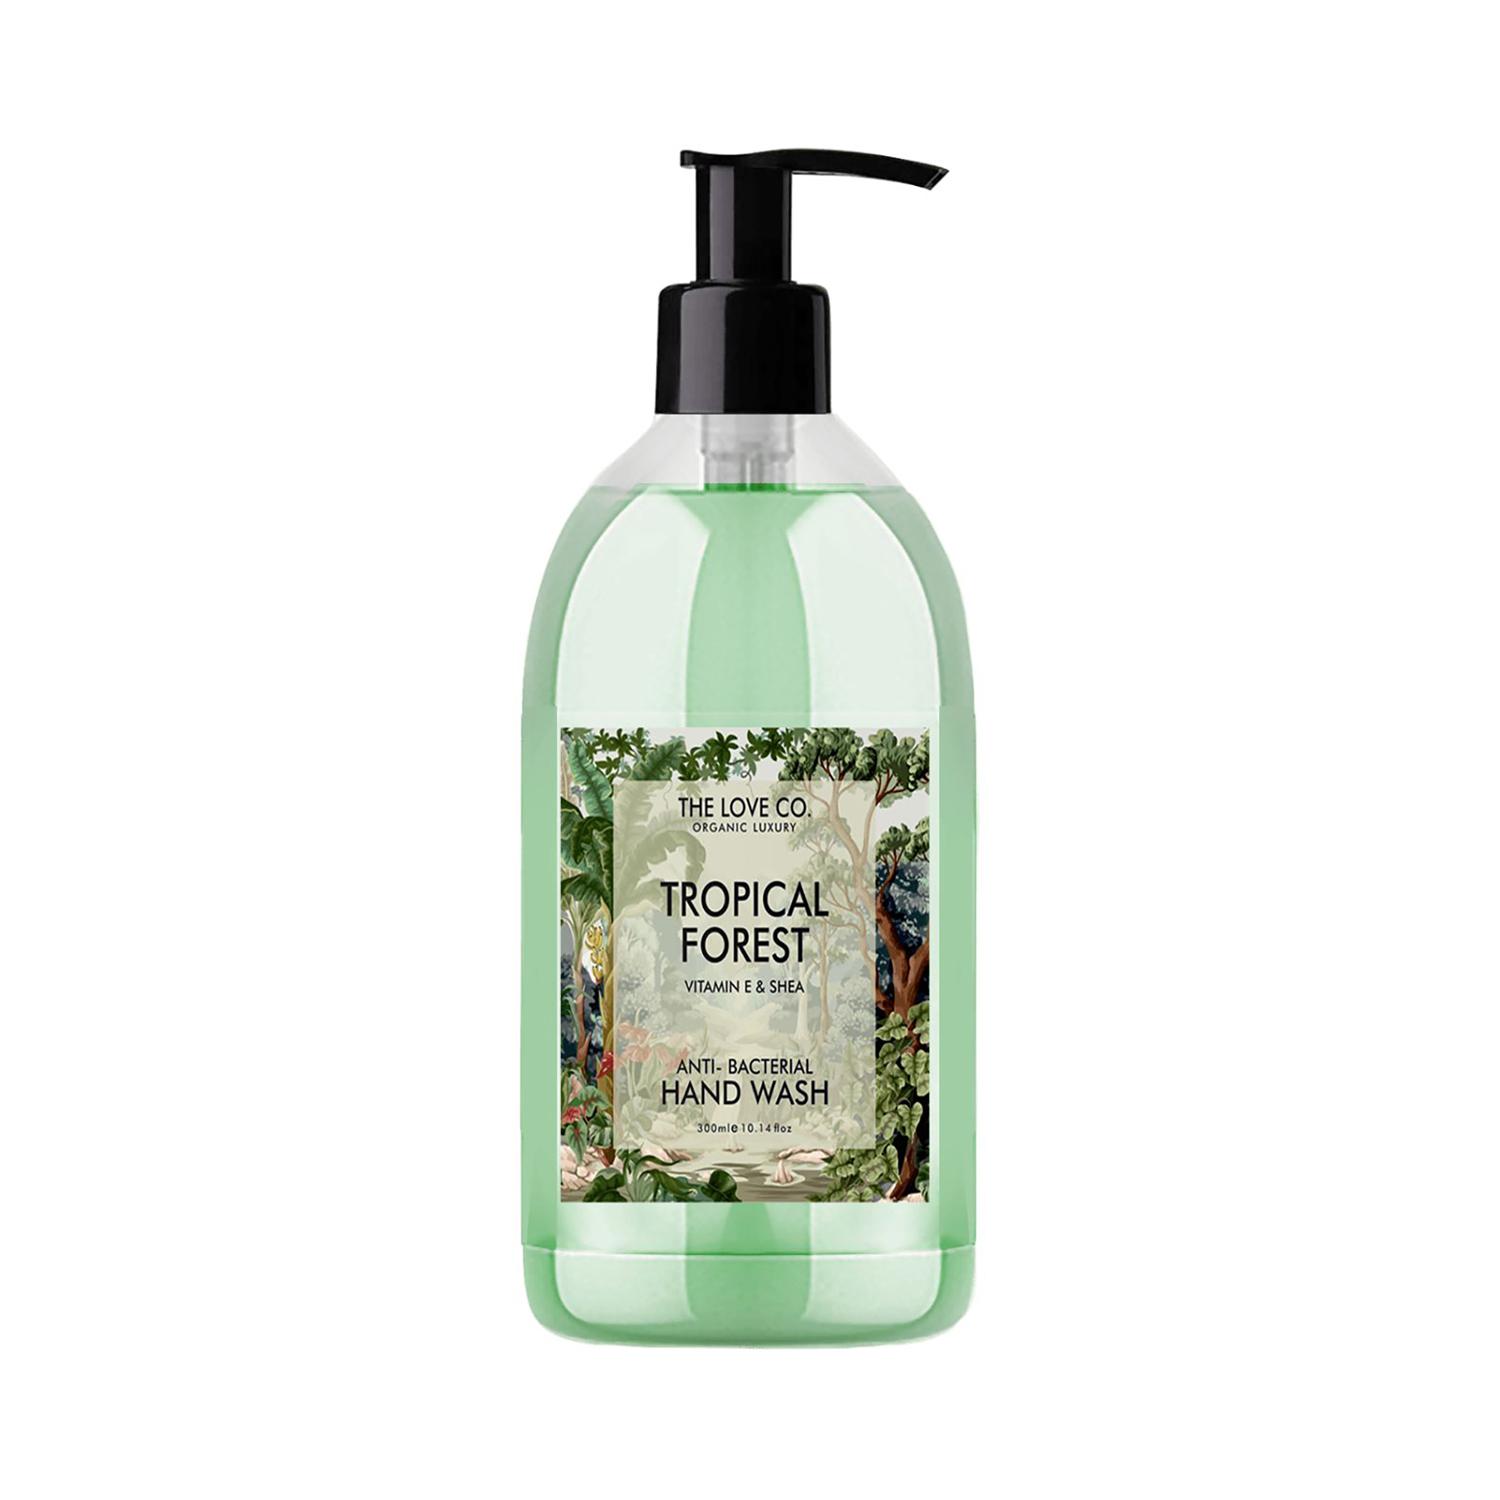 THE LOVE CO. | THE LOVE CO. Tropical Forest Hand Wash (300ml)